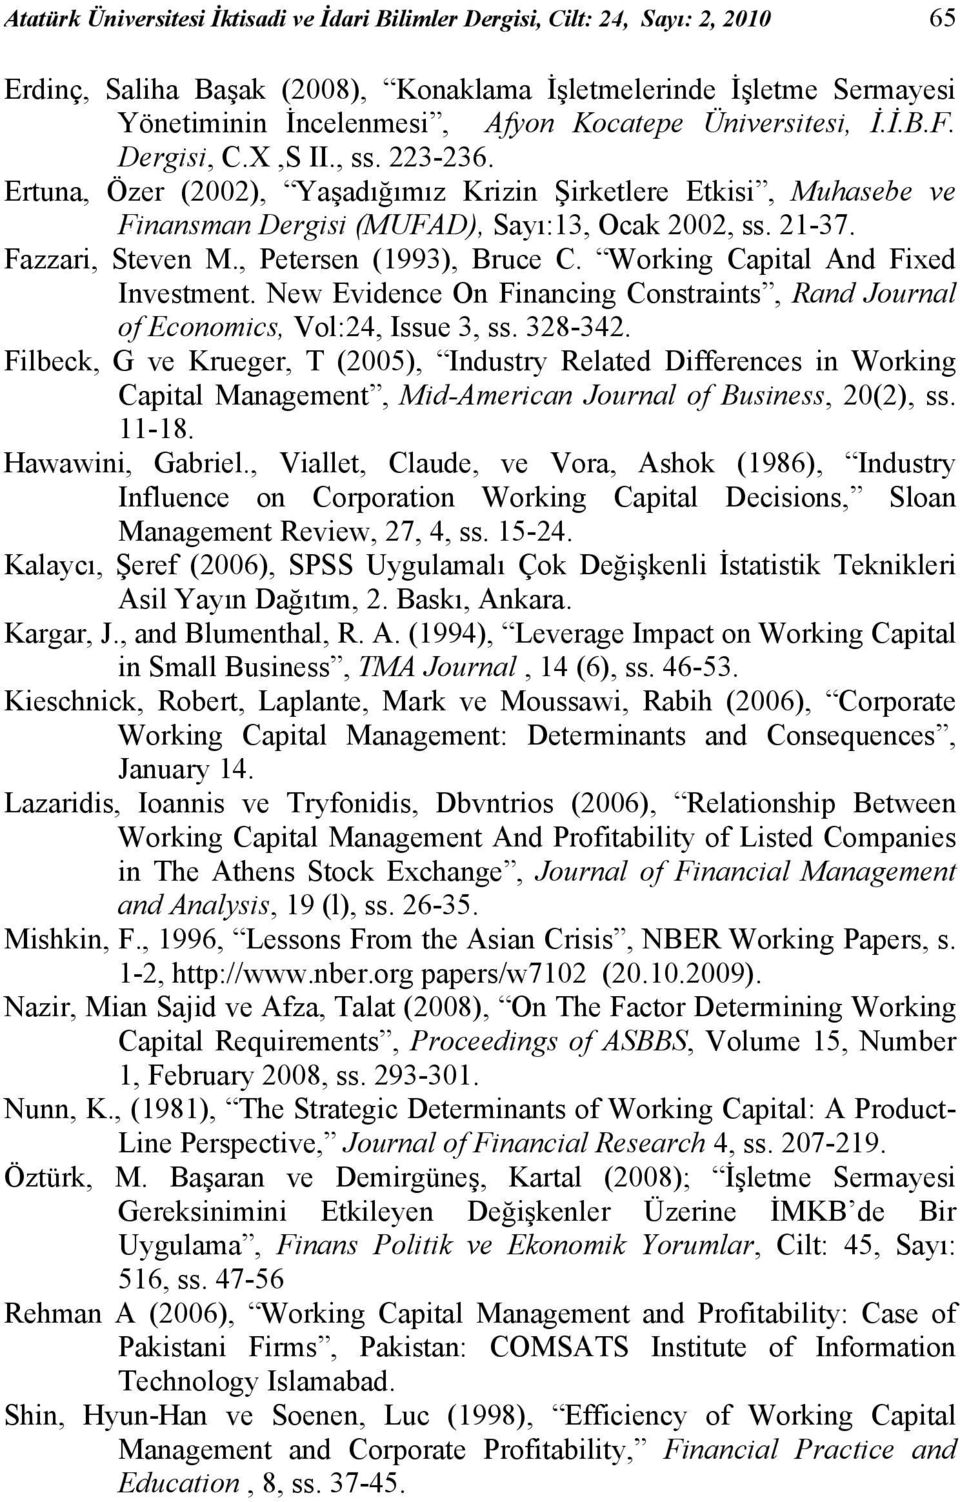 Workng Captal And Fxed Investment. New Evdence On Fnancng Constrants, Rand Journal of Economcs, Vol:24, Issue 3, ss. 328-342.